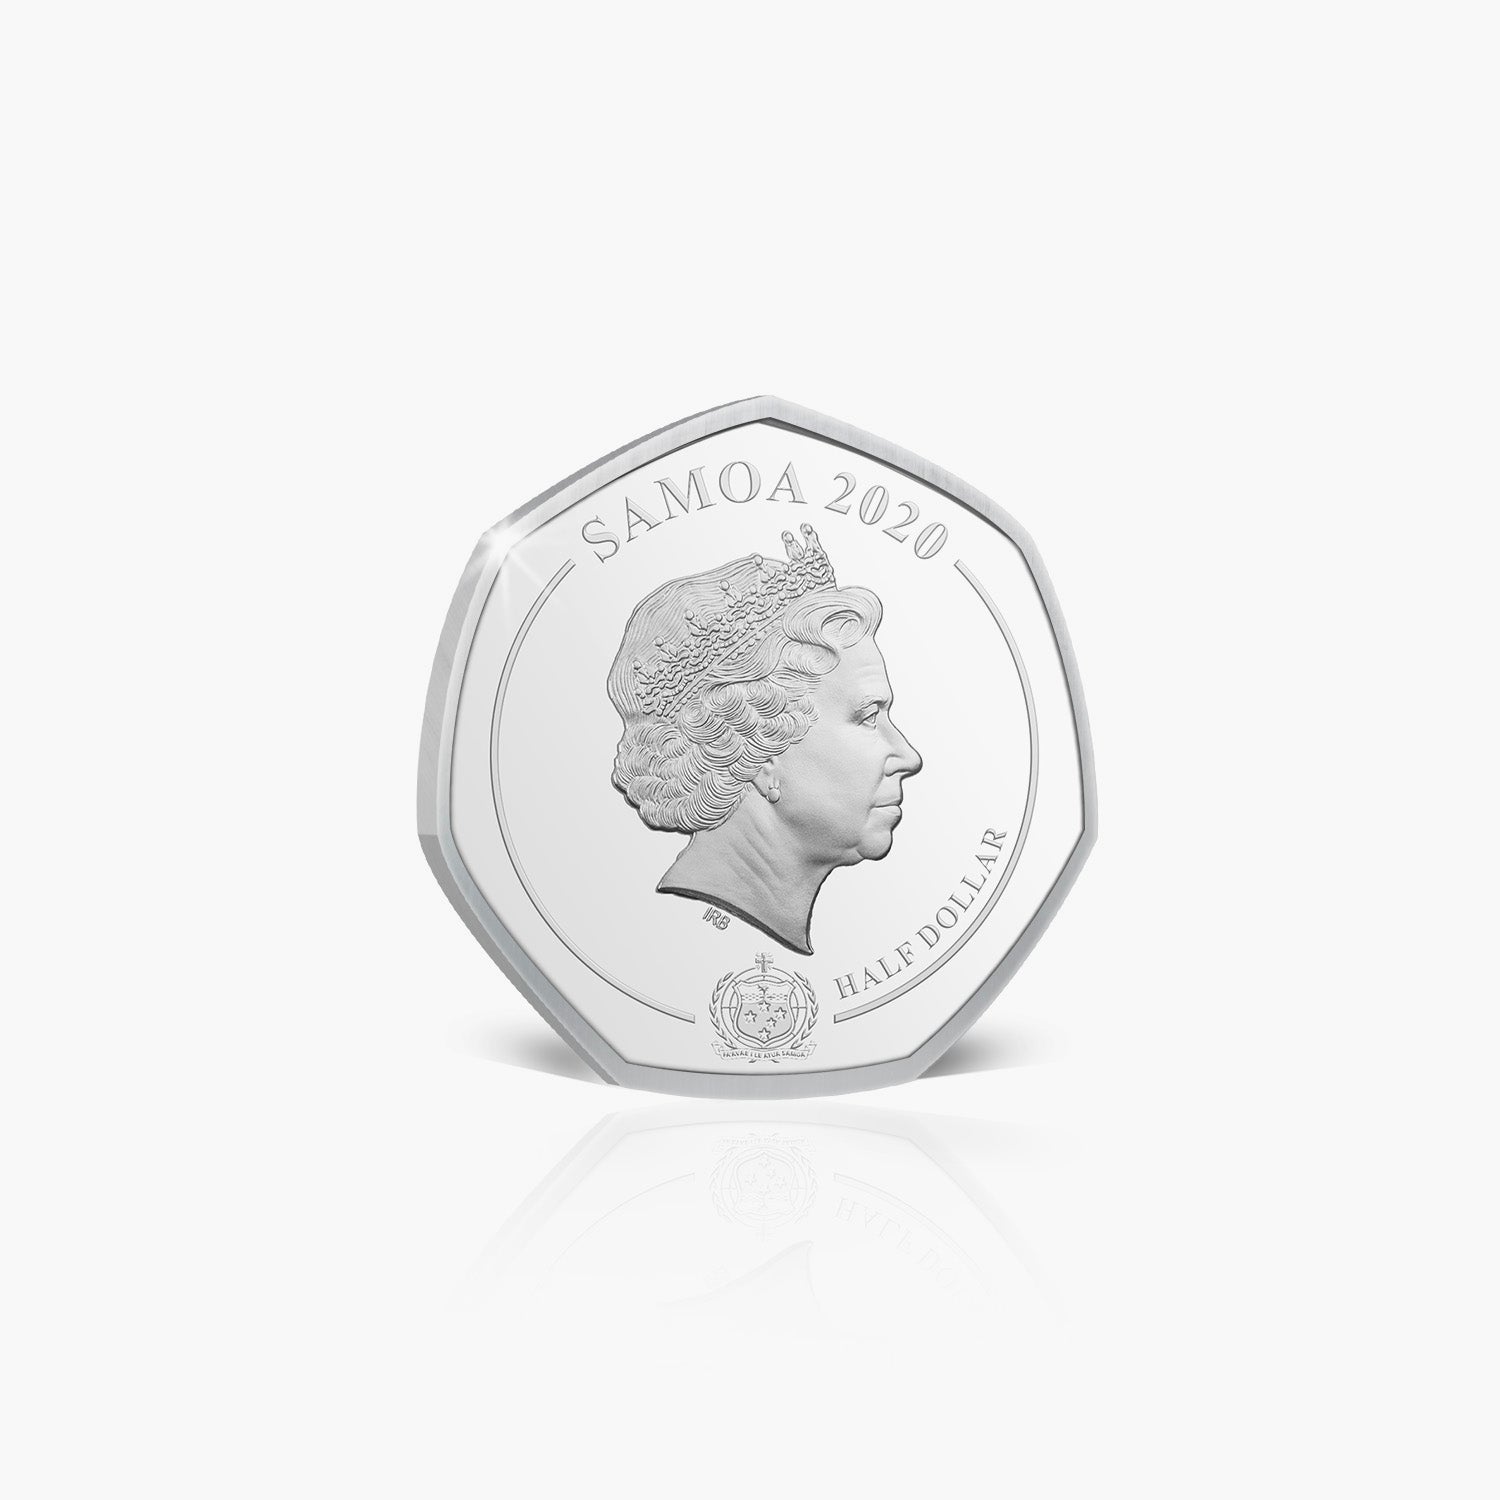 Emergency Services Silver Plated Coin